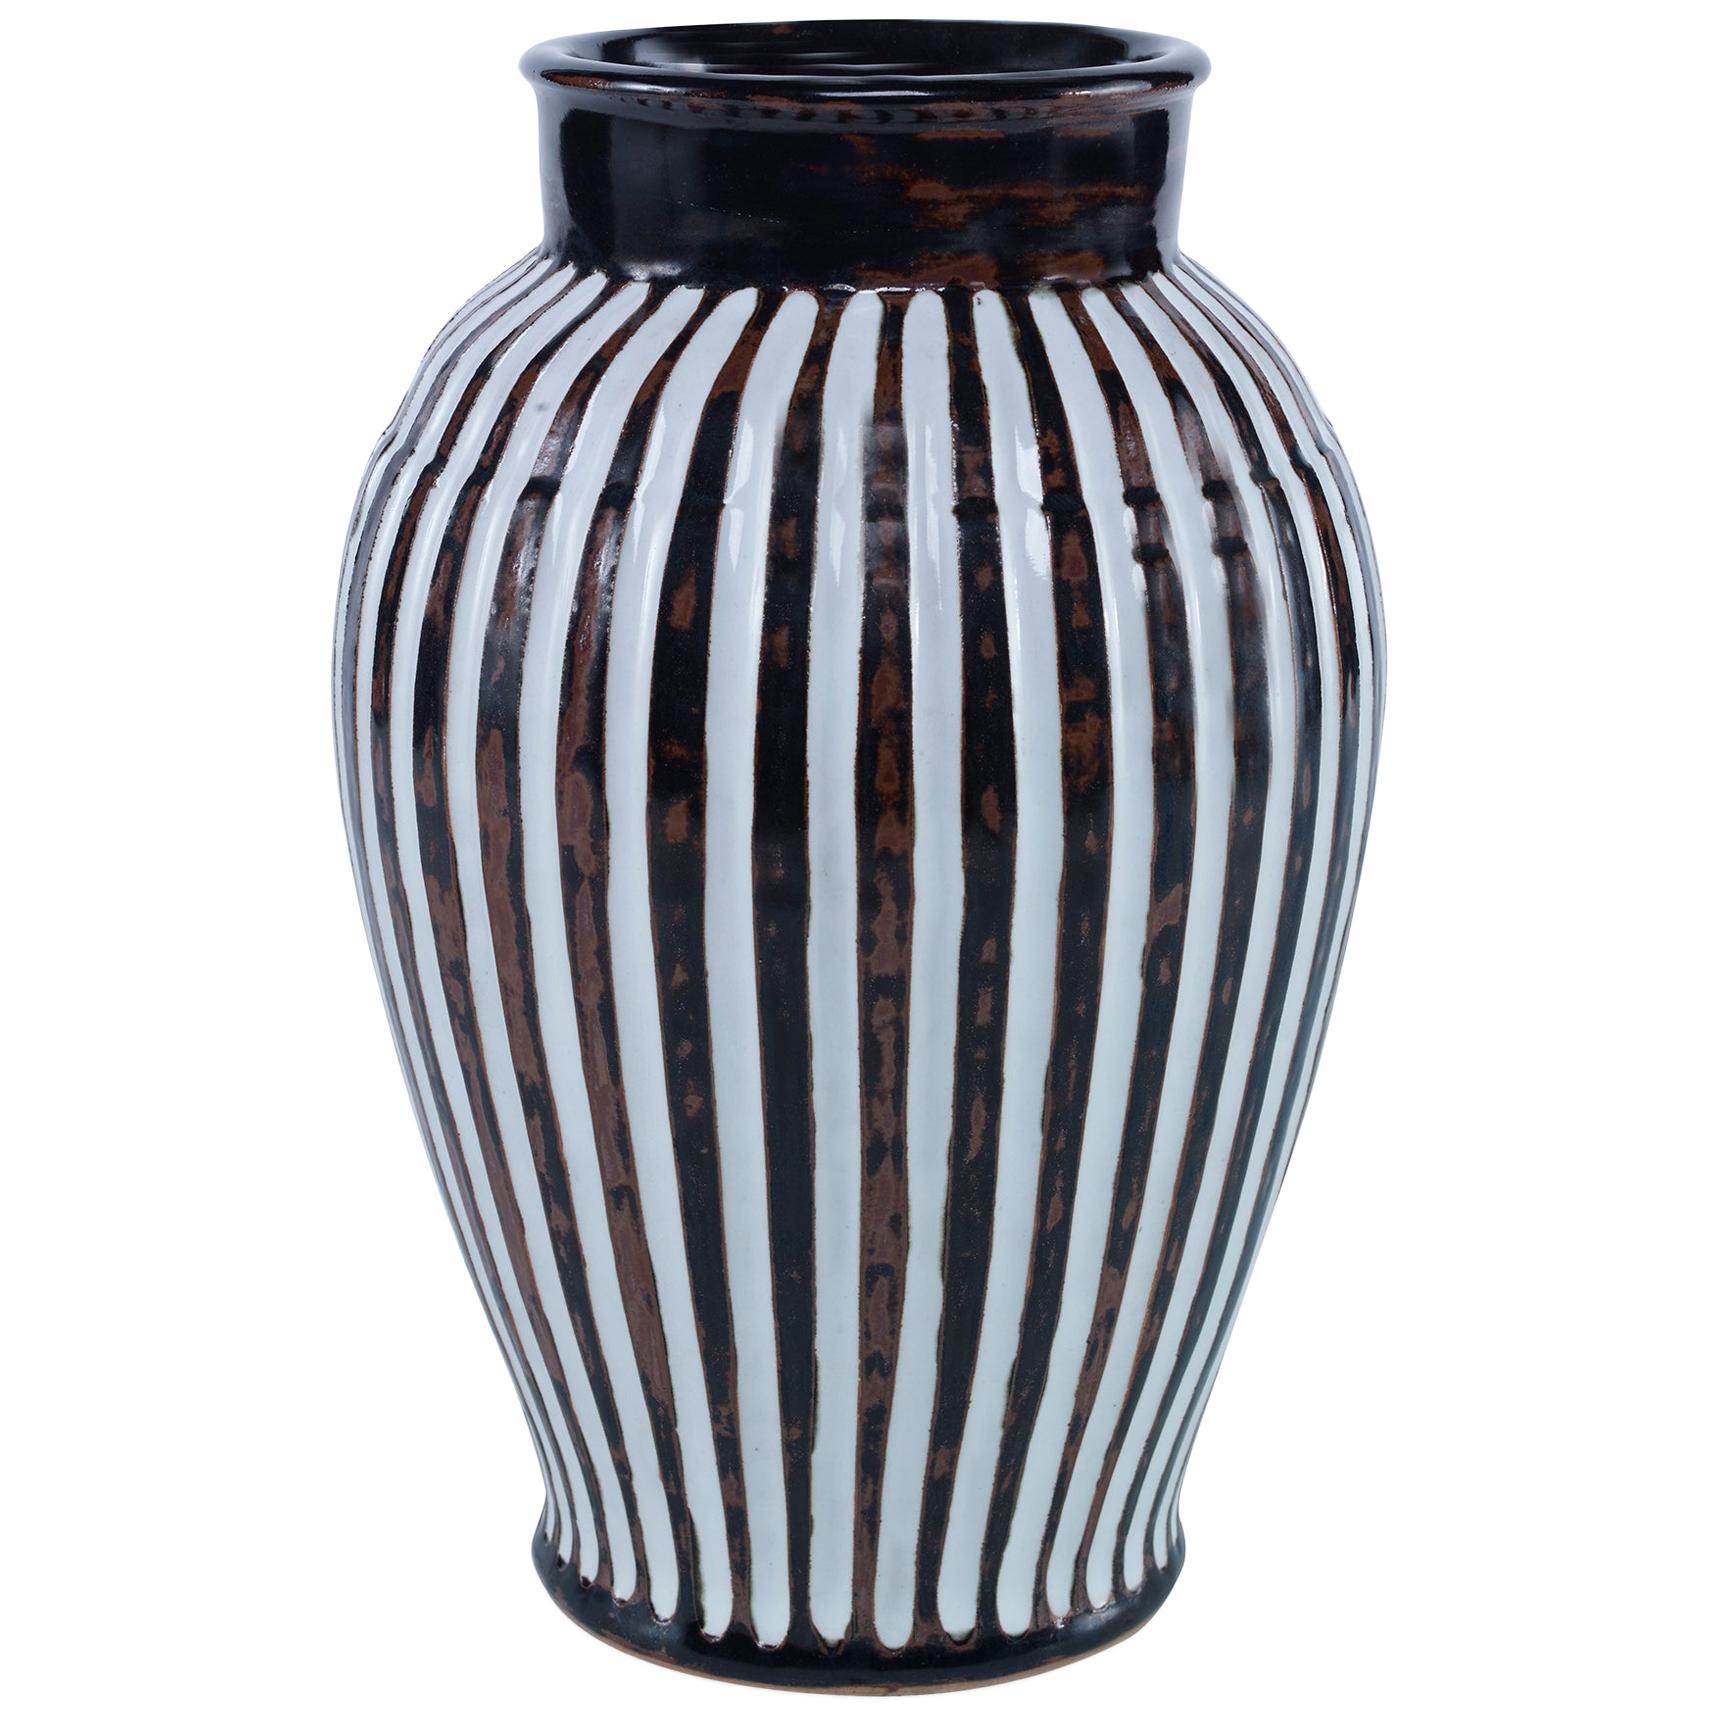 Fen Handmade Stoneware Vase with Brown and White Stripes by CuratedKravet